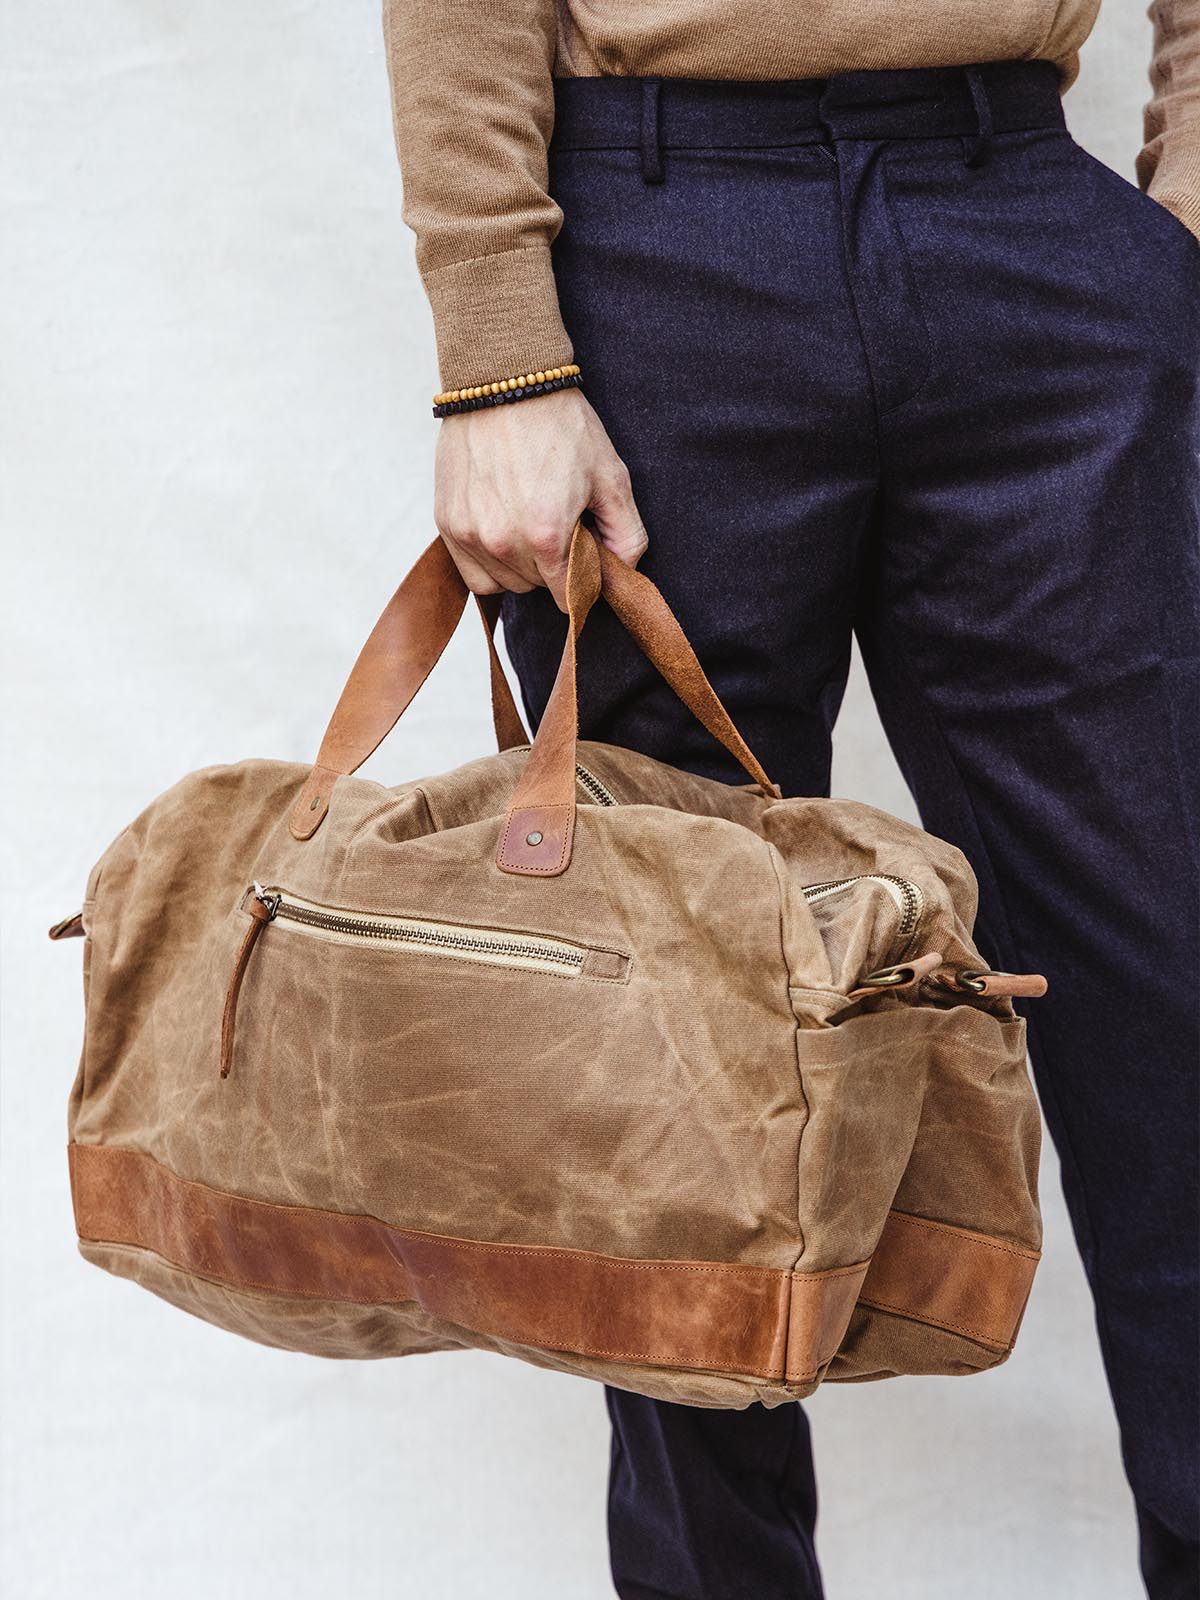 Male model carrying tan weekender bag in hangs without crossbody strap/